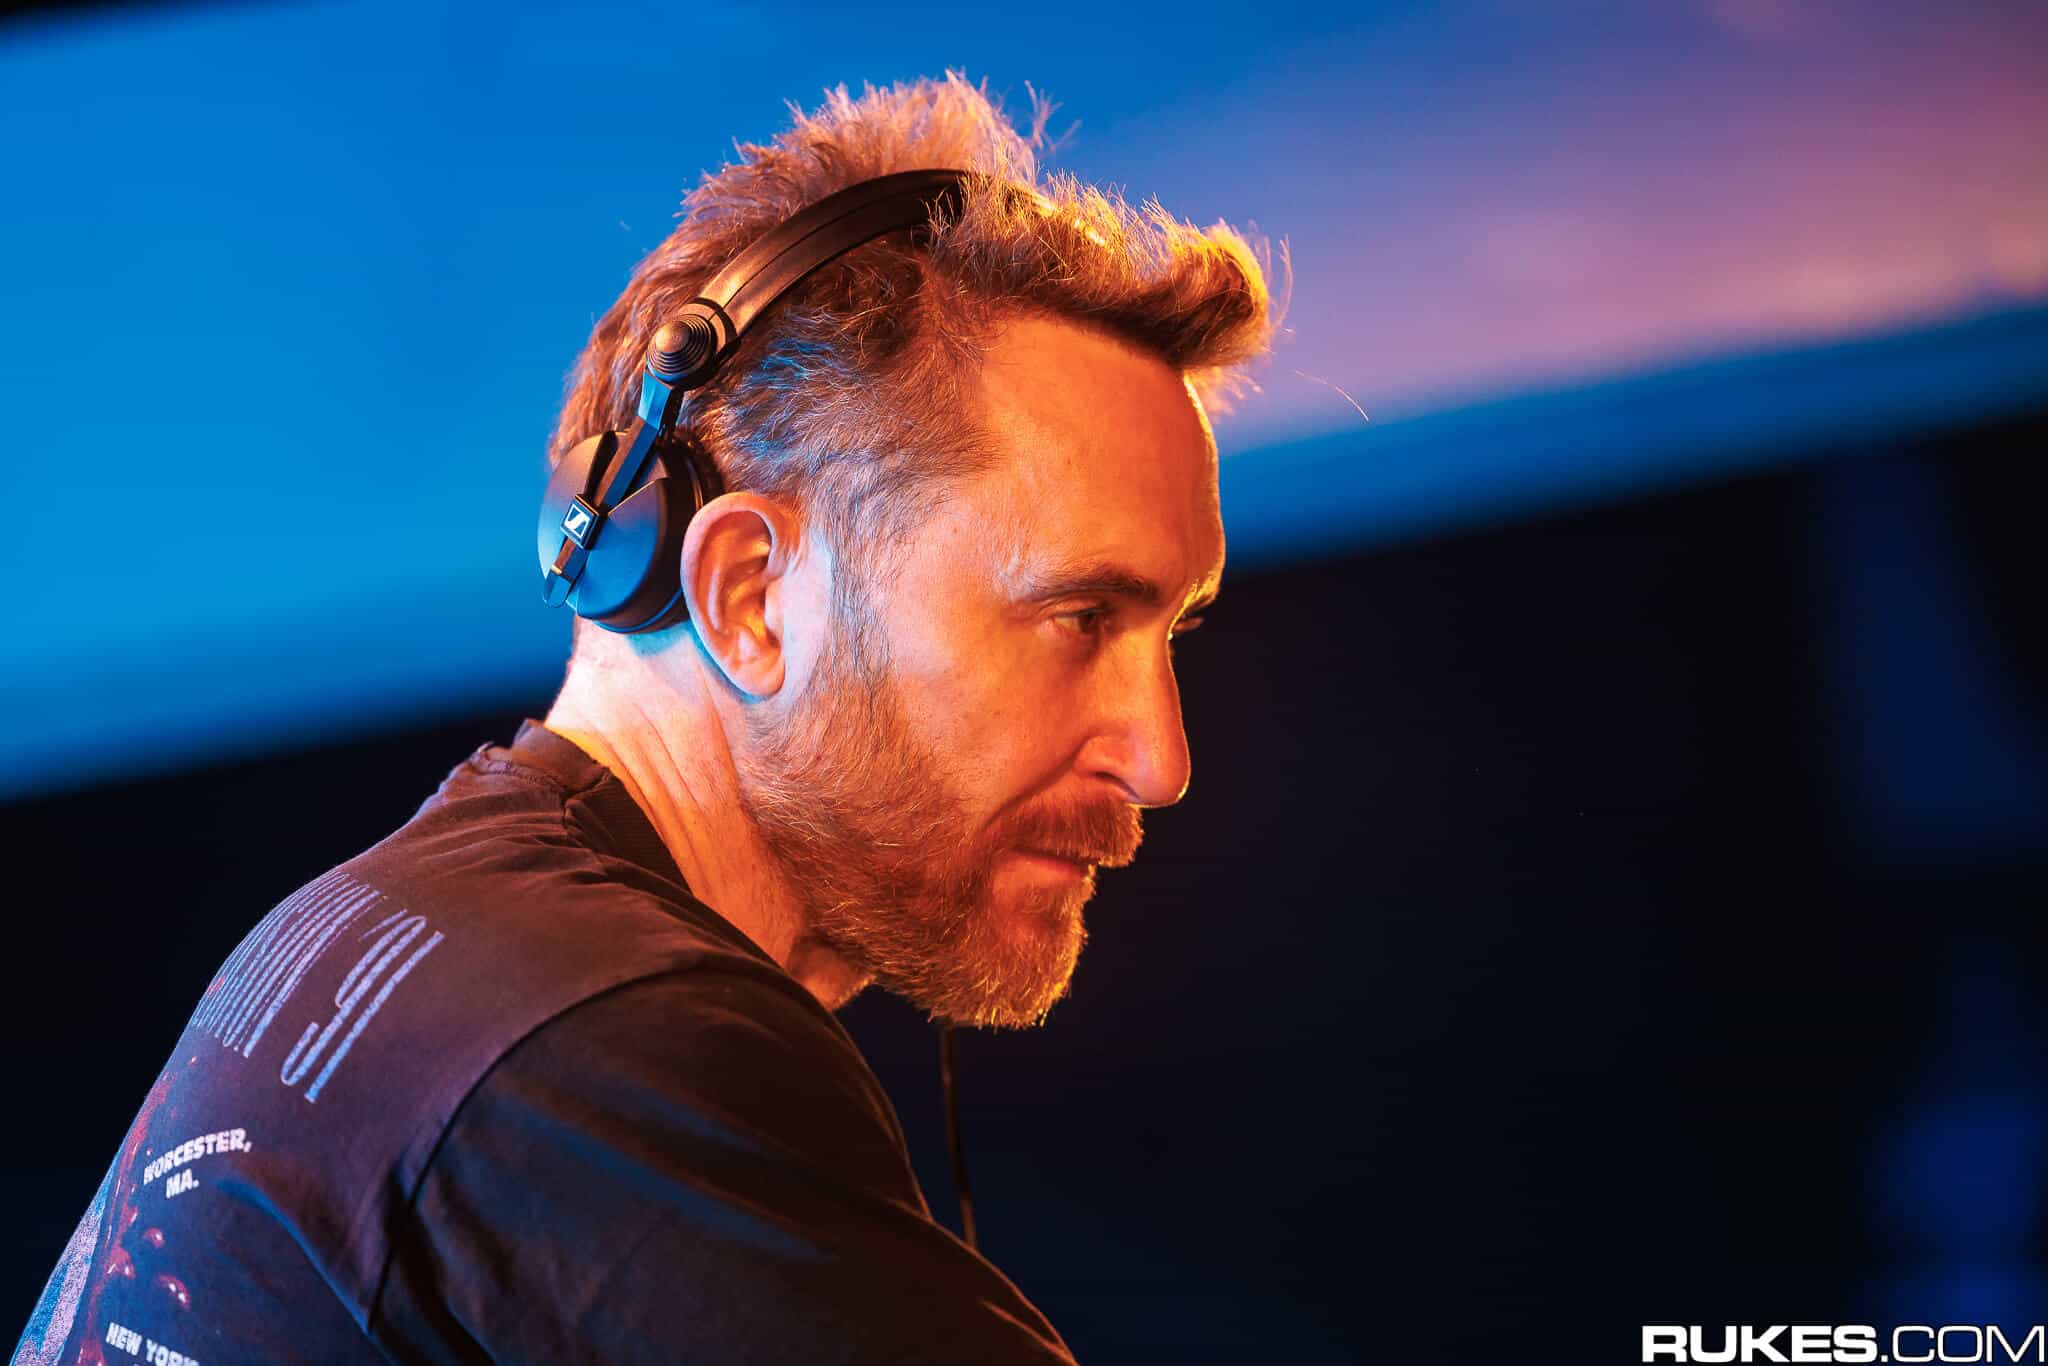 David Guetta & James Hype deliver an electrifying new remix of ‘Crazy What Love Can Do’: Listen